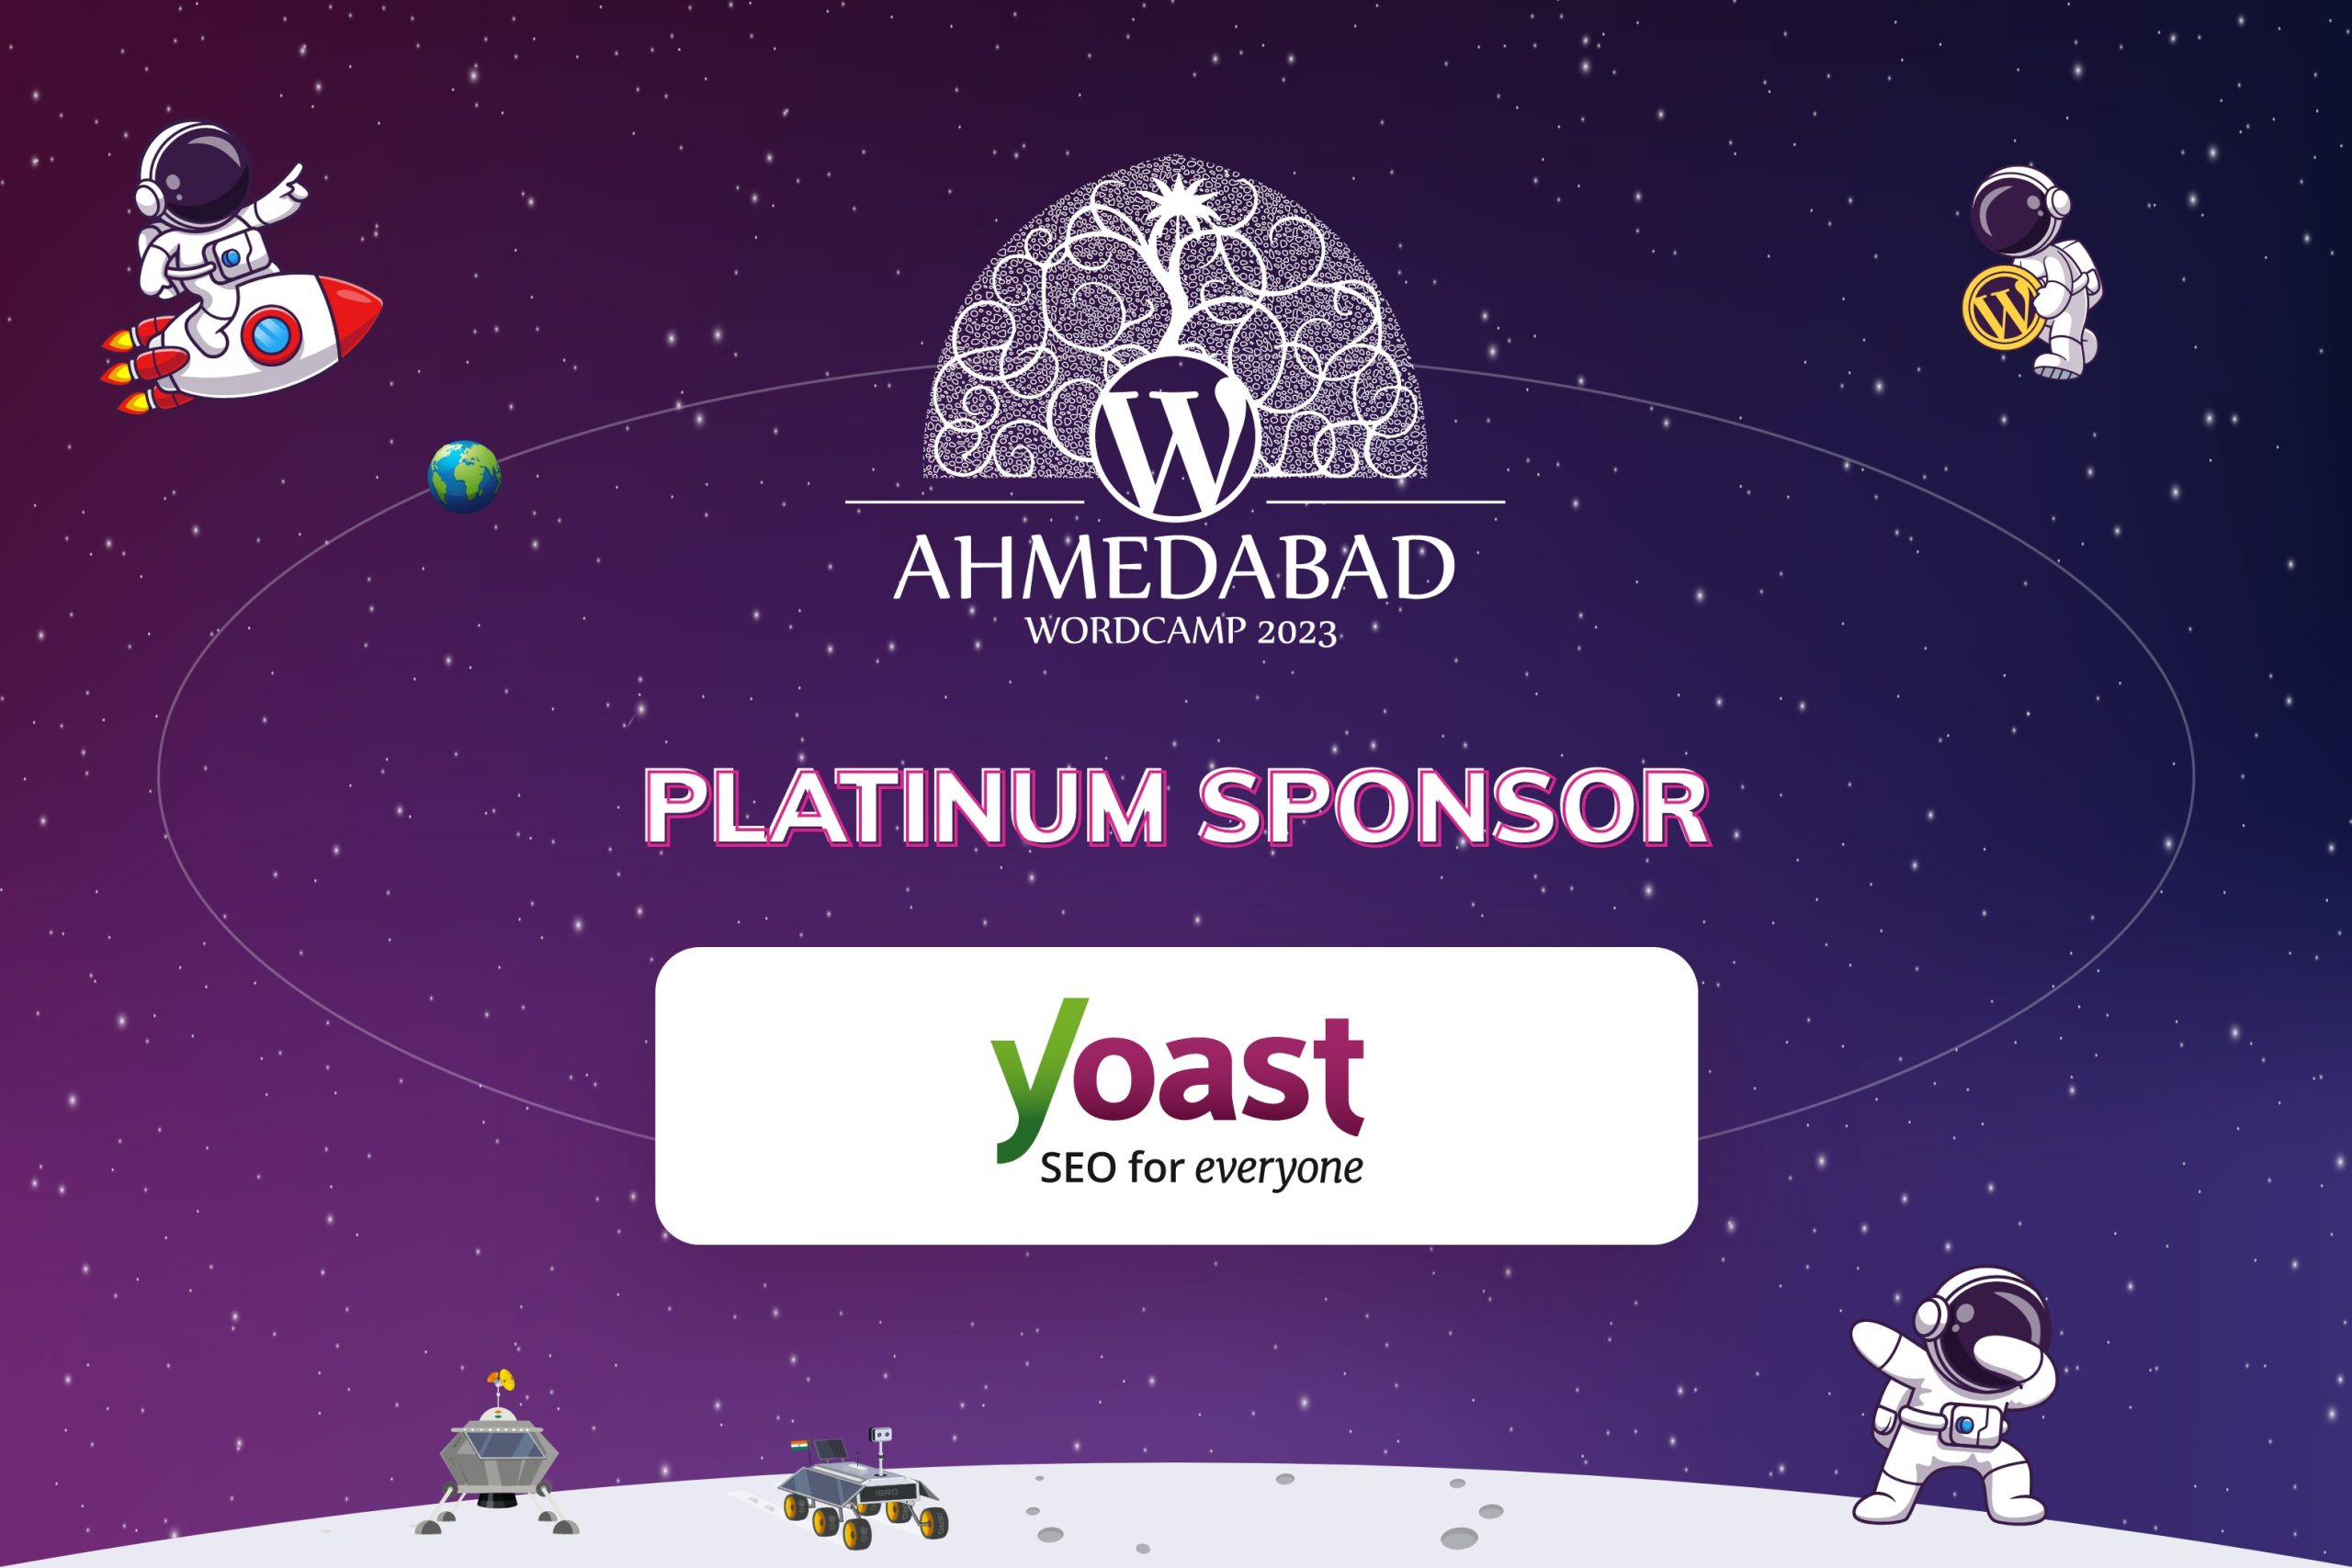 Thank You Yoast, for being our Platinum Sponsor